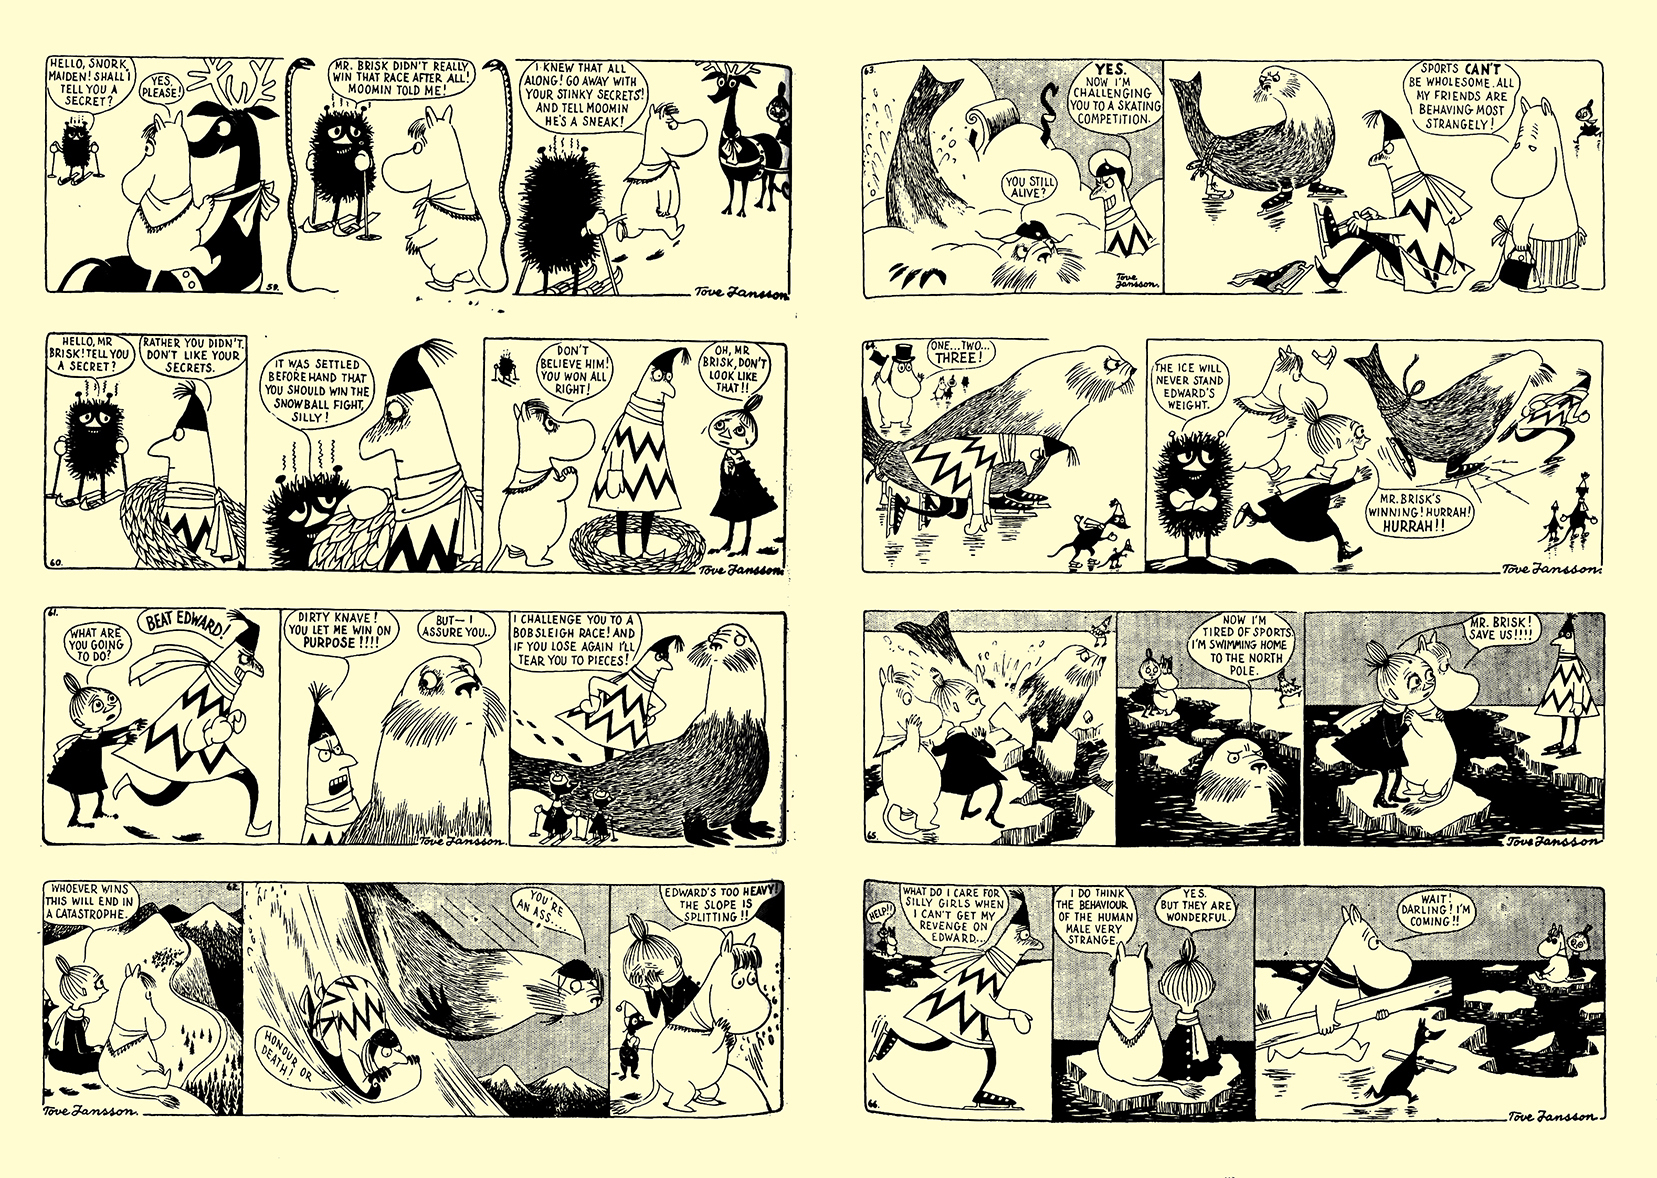 Moomin The Complete Tove Jansson Book 2 review